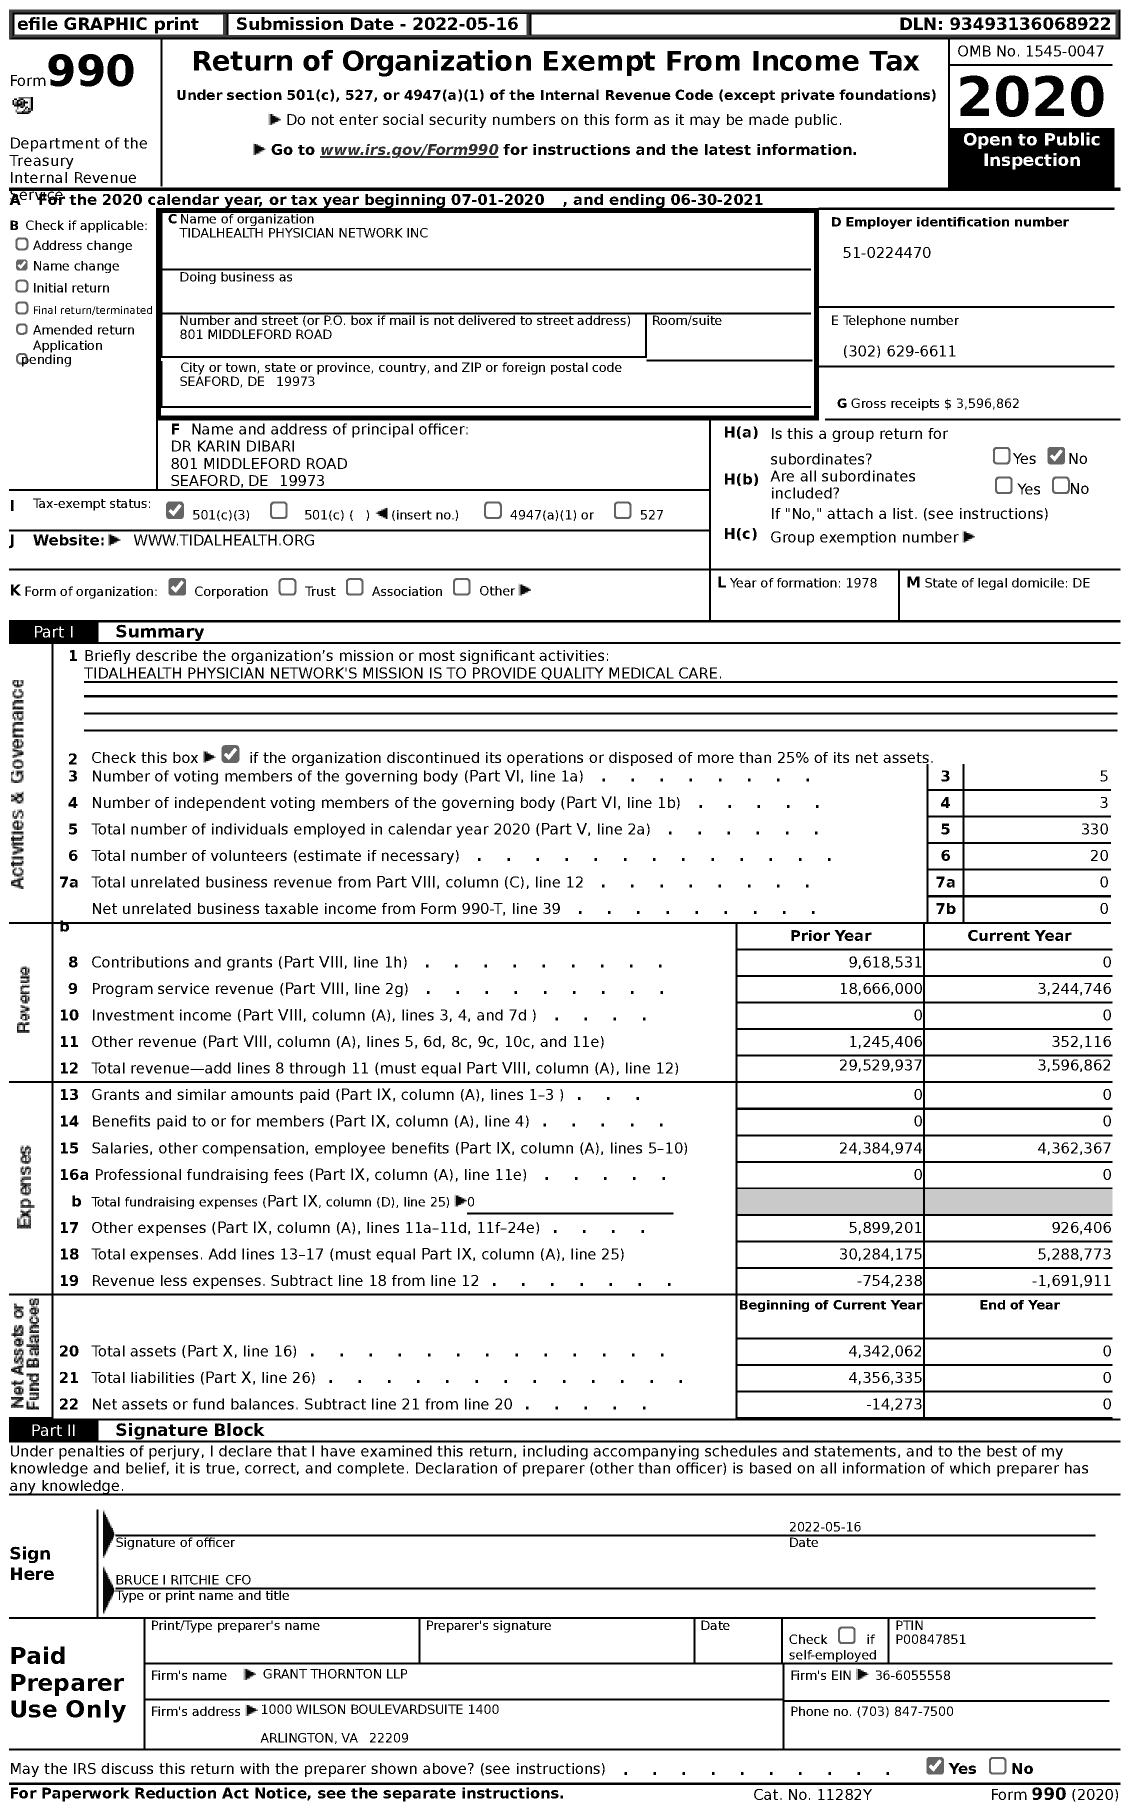 Image of first page of 2020 Form 990 for Tidalhealth Physician Network